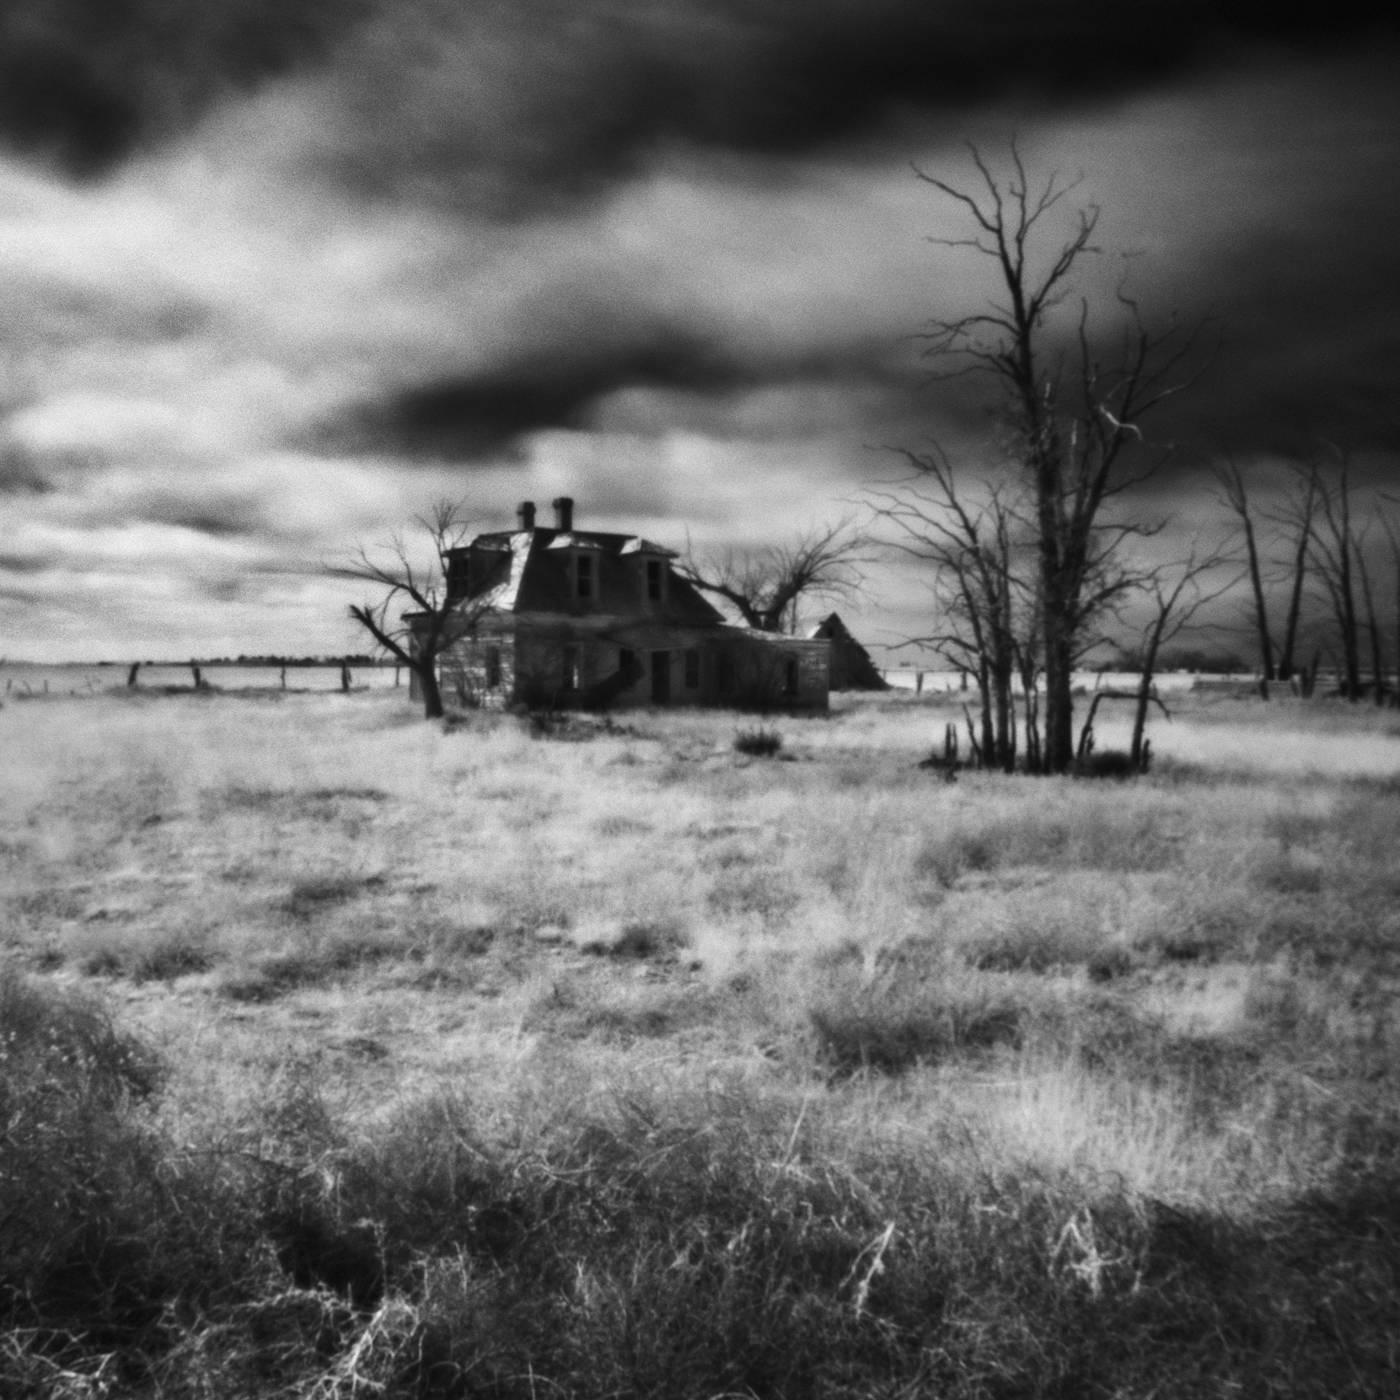 Cody S. Brothers Black and White Photograph - Landscape Photography Square Series: "Estancia House" 